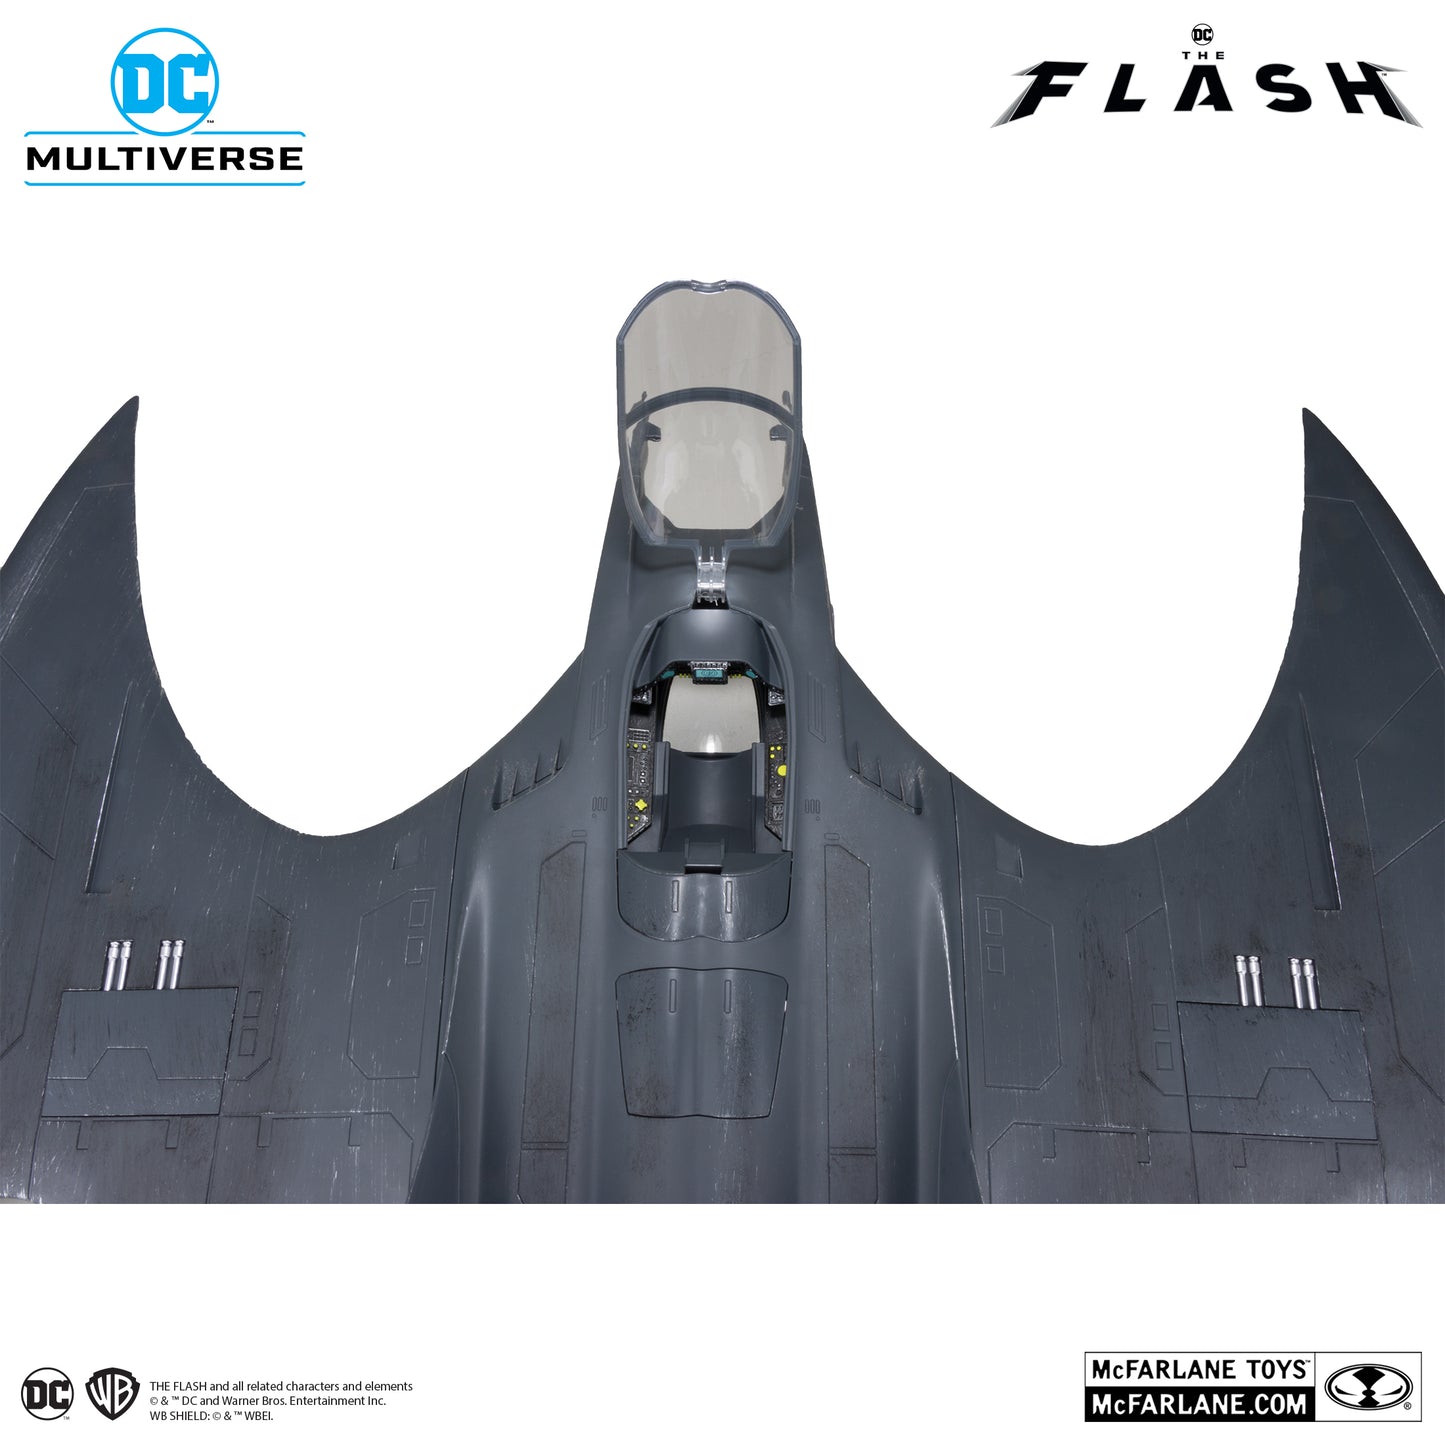 BATWING (GOLD LABEL) (THE FLASH MOVIE) close up seat look - heretoserveyou